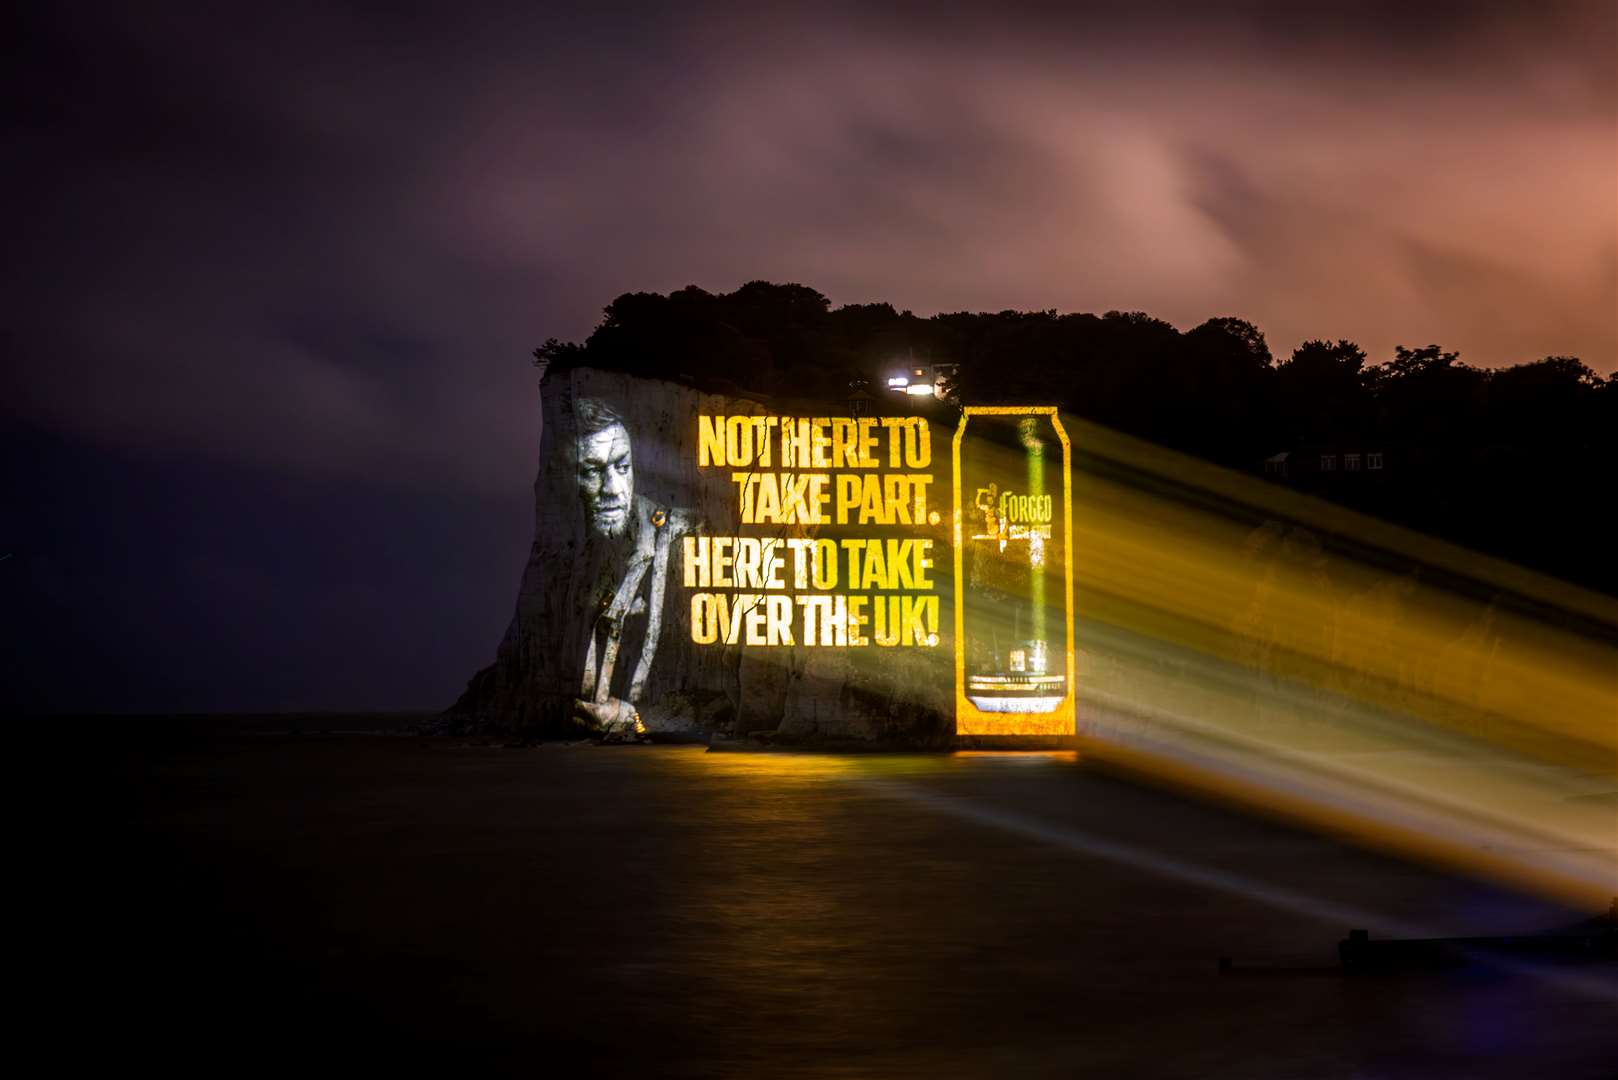 UFC fighter Conor McGregor was projected onto the White Cliffs of Dover. Picture: Radioactive